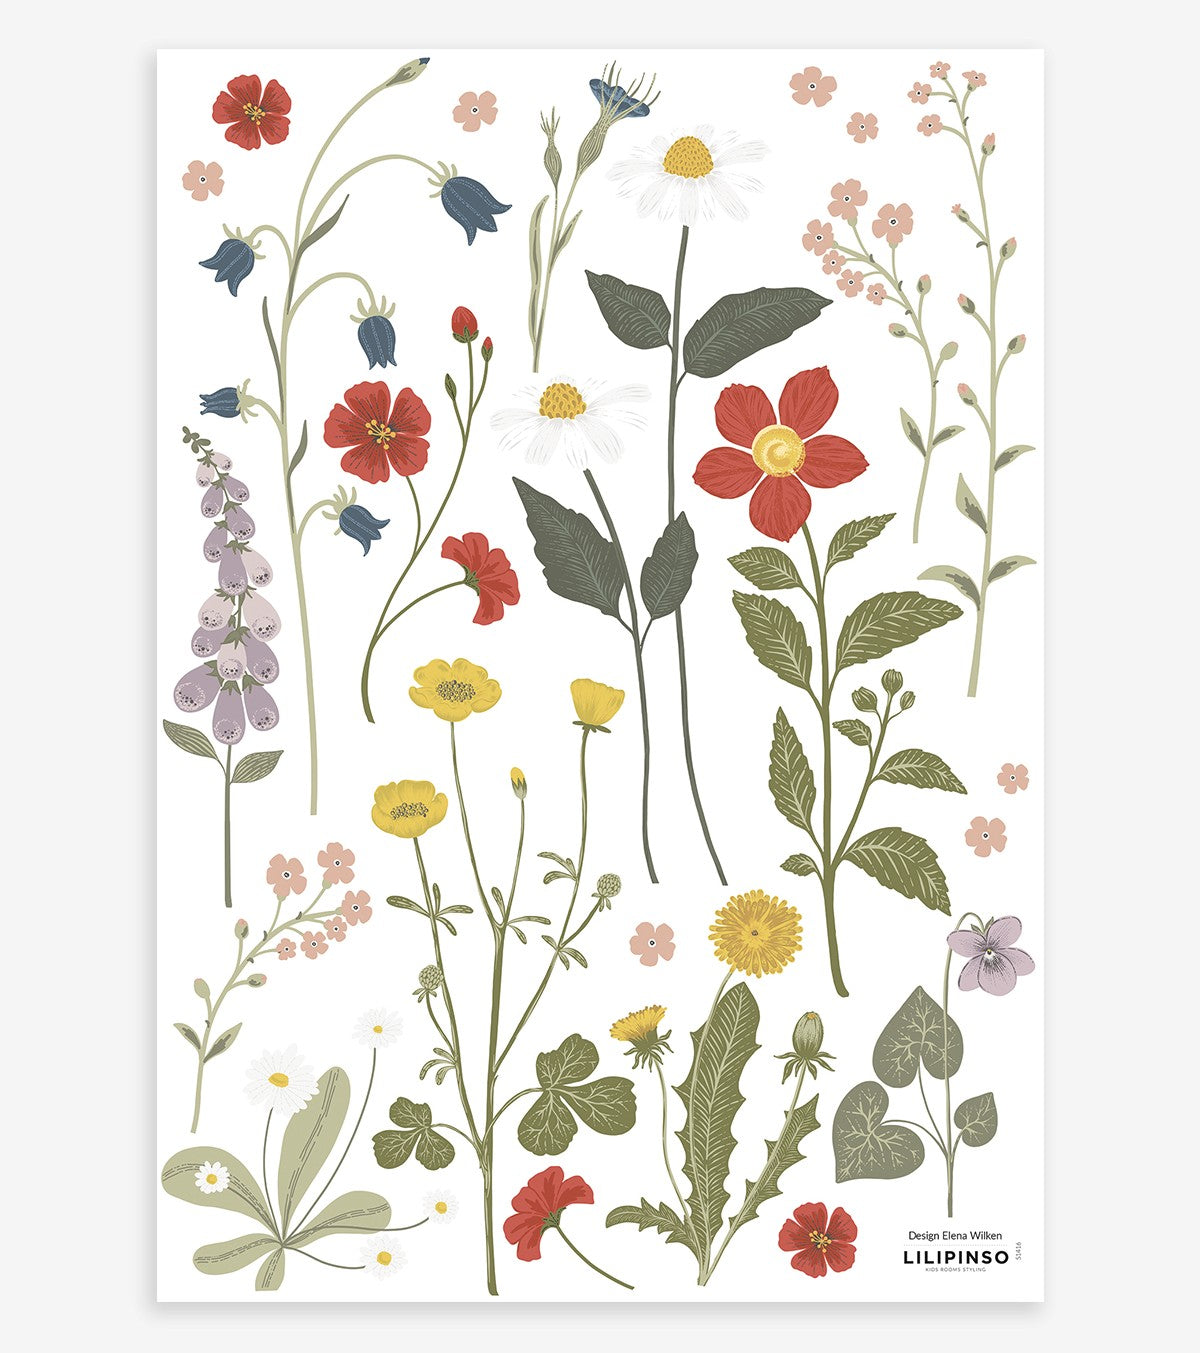 WILDFLOWERS - Stickers muraux - Fleurs sauvages